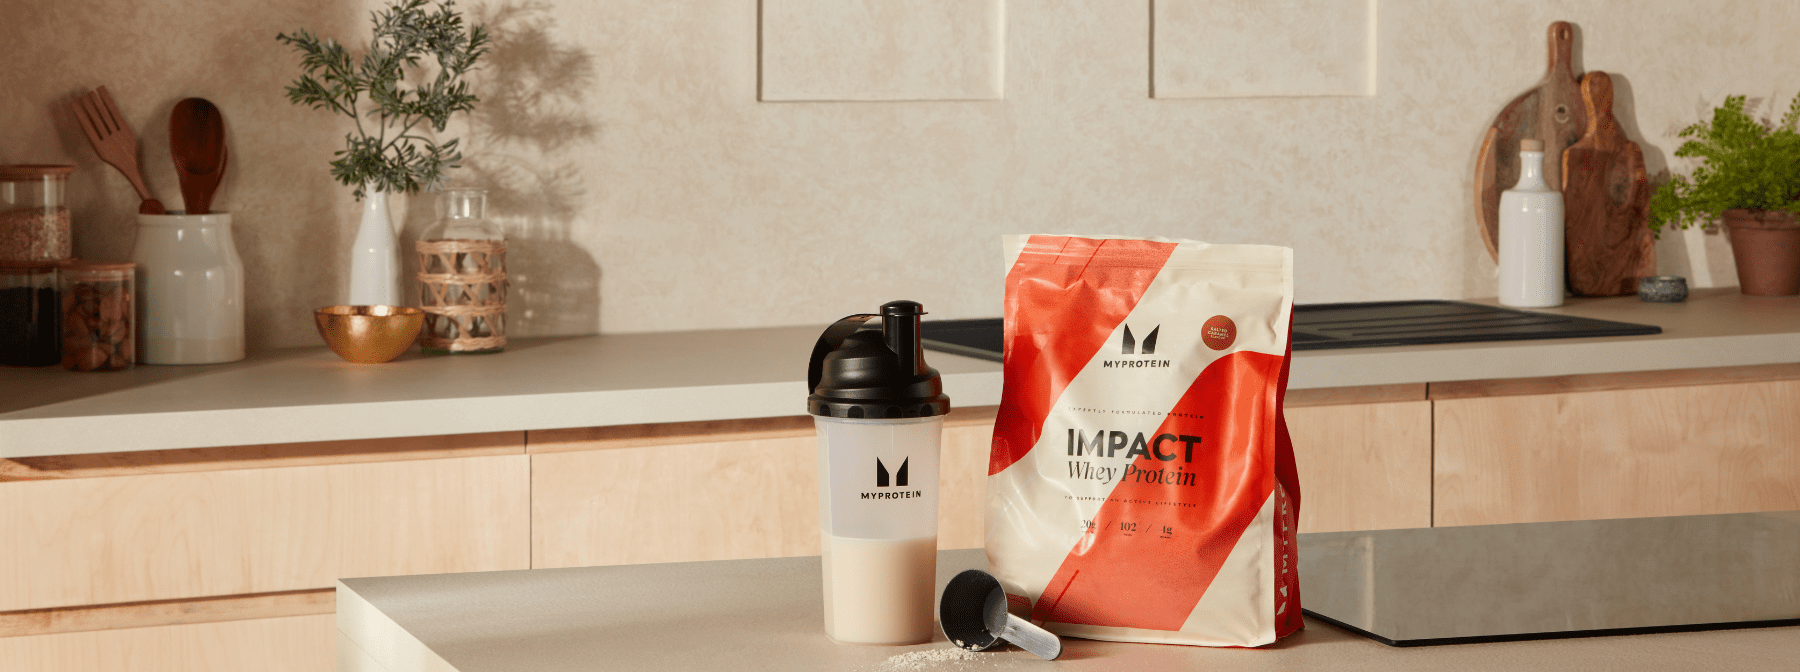 Best Whey Protein | The Difference Between Impact Whey & Impact Whey Isolate?